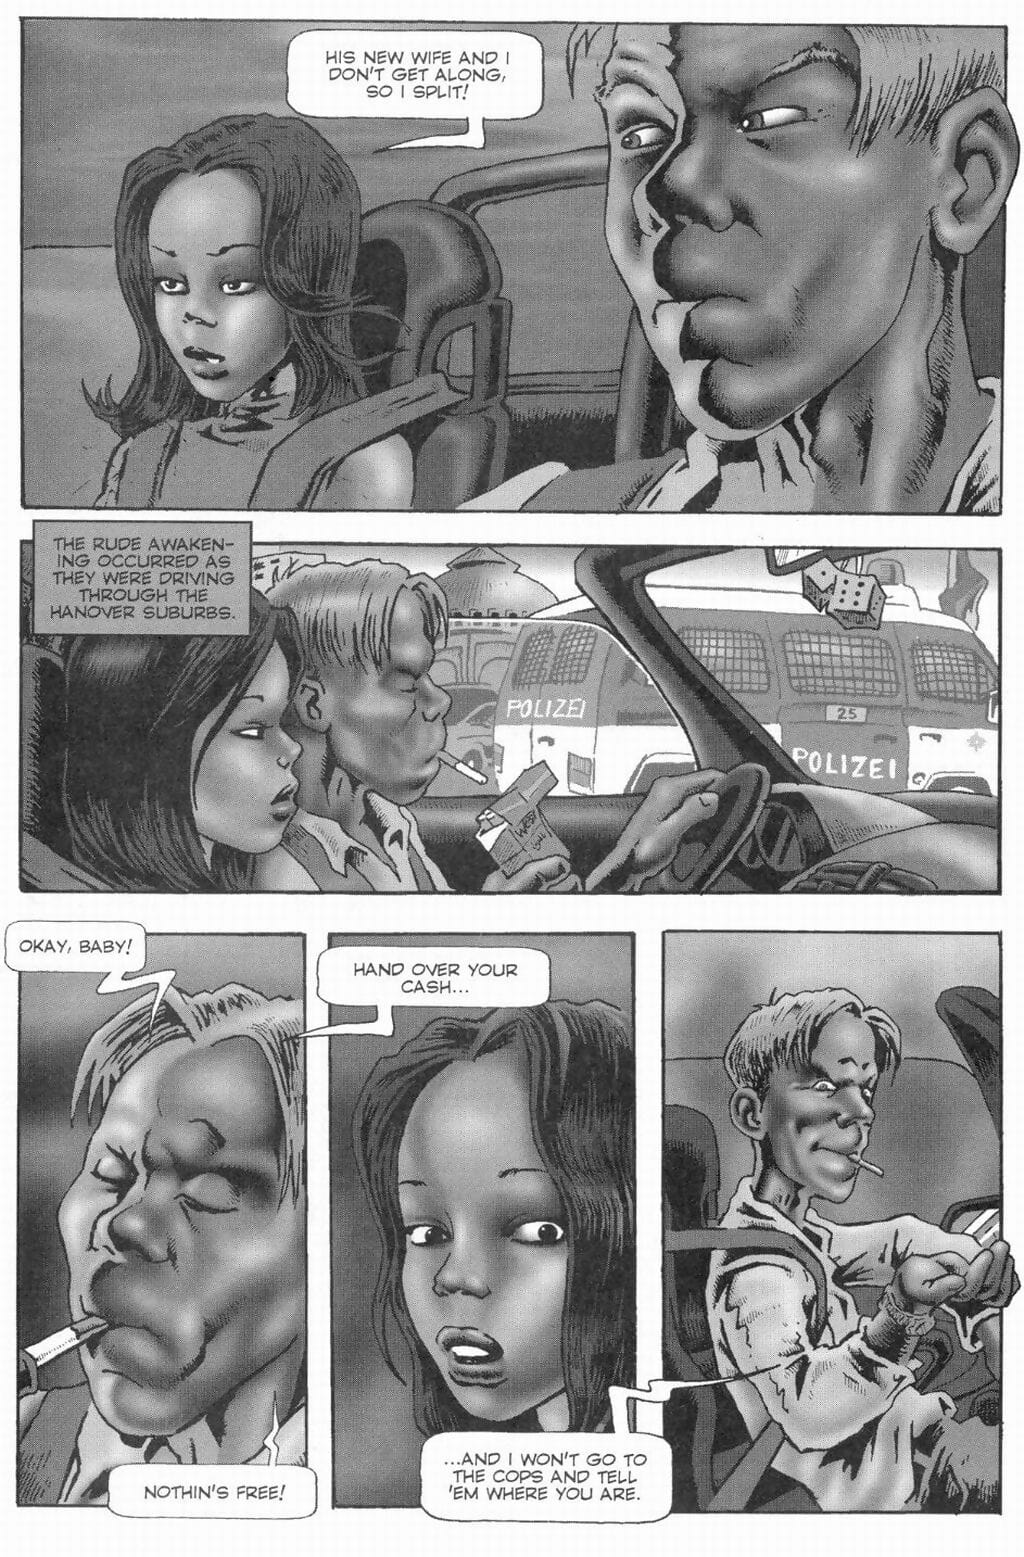 Alraune #2 page 1